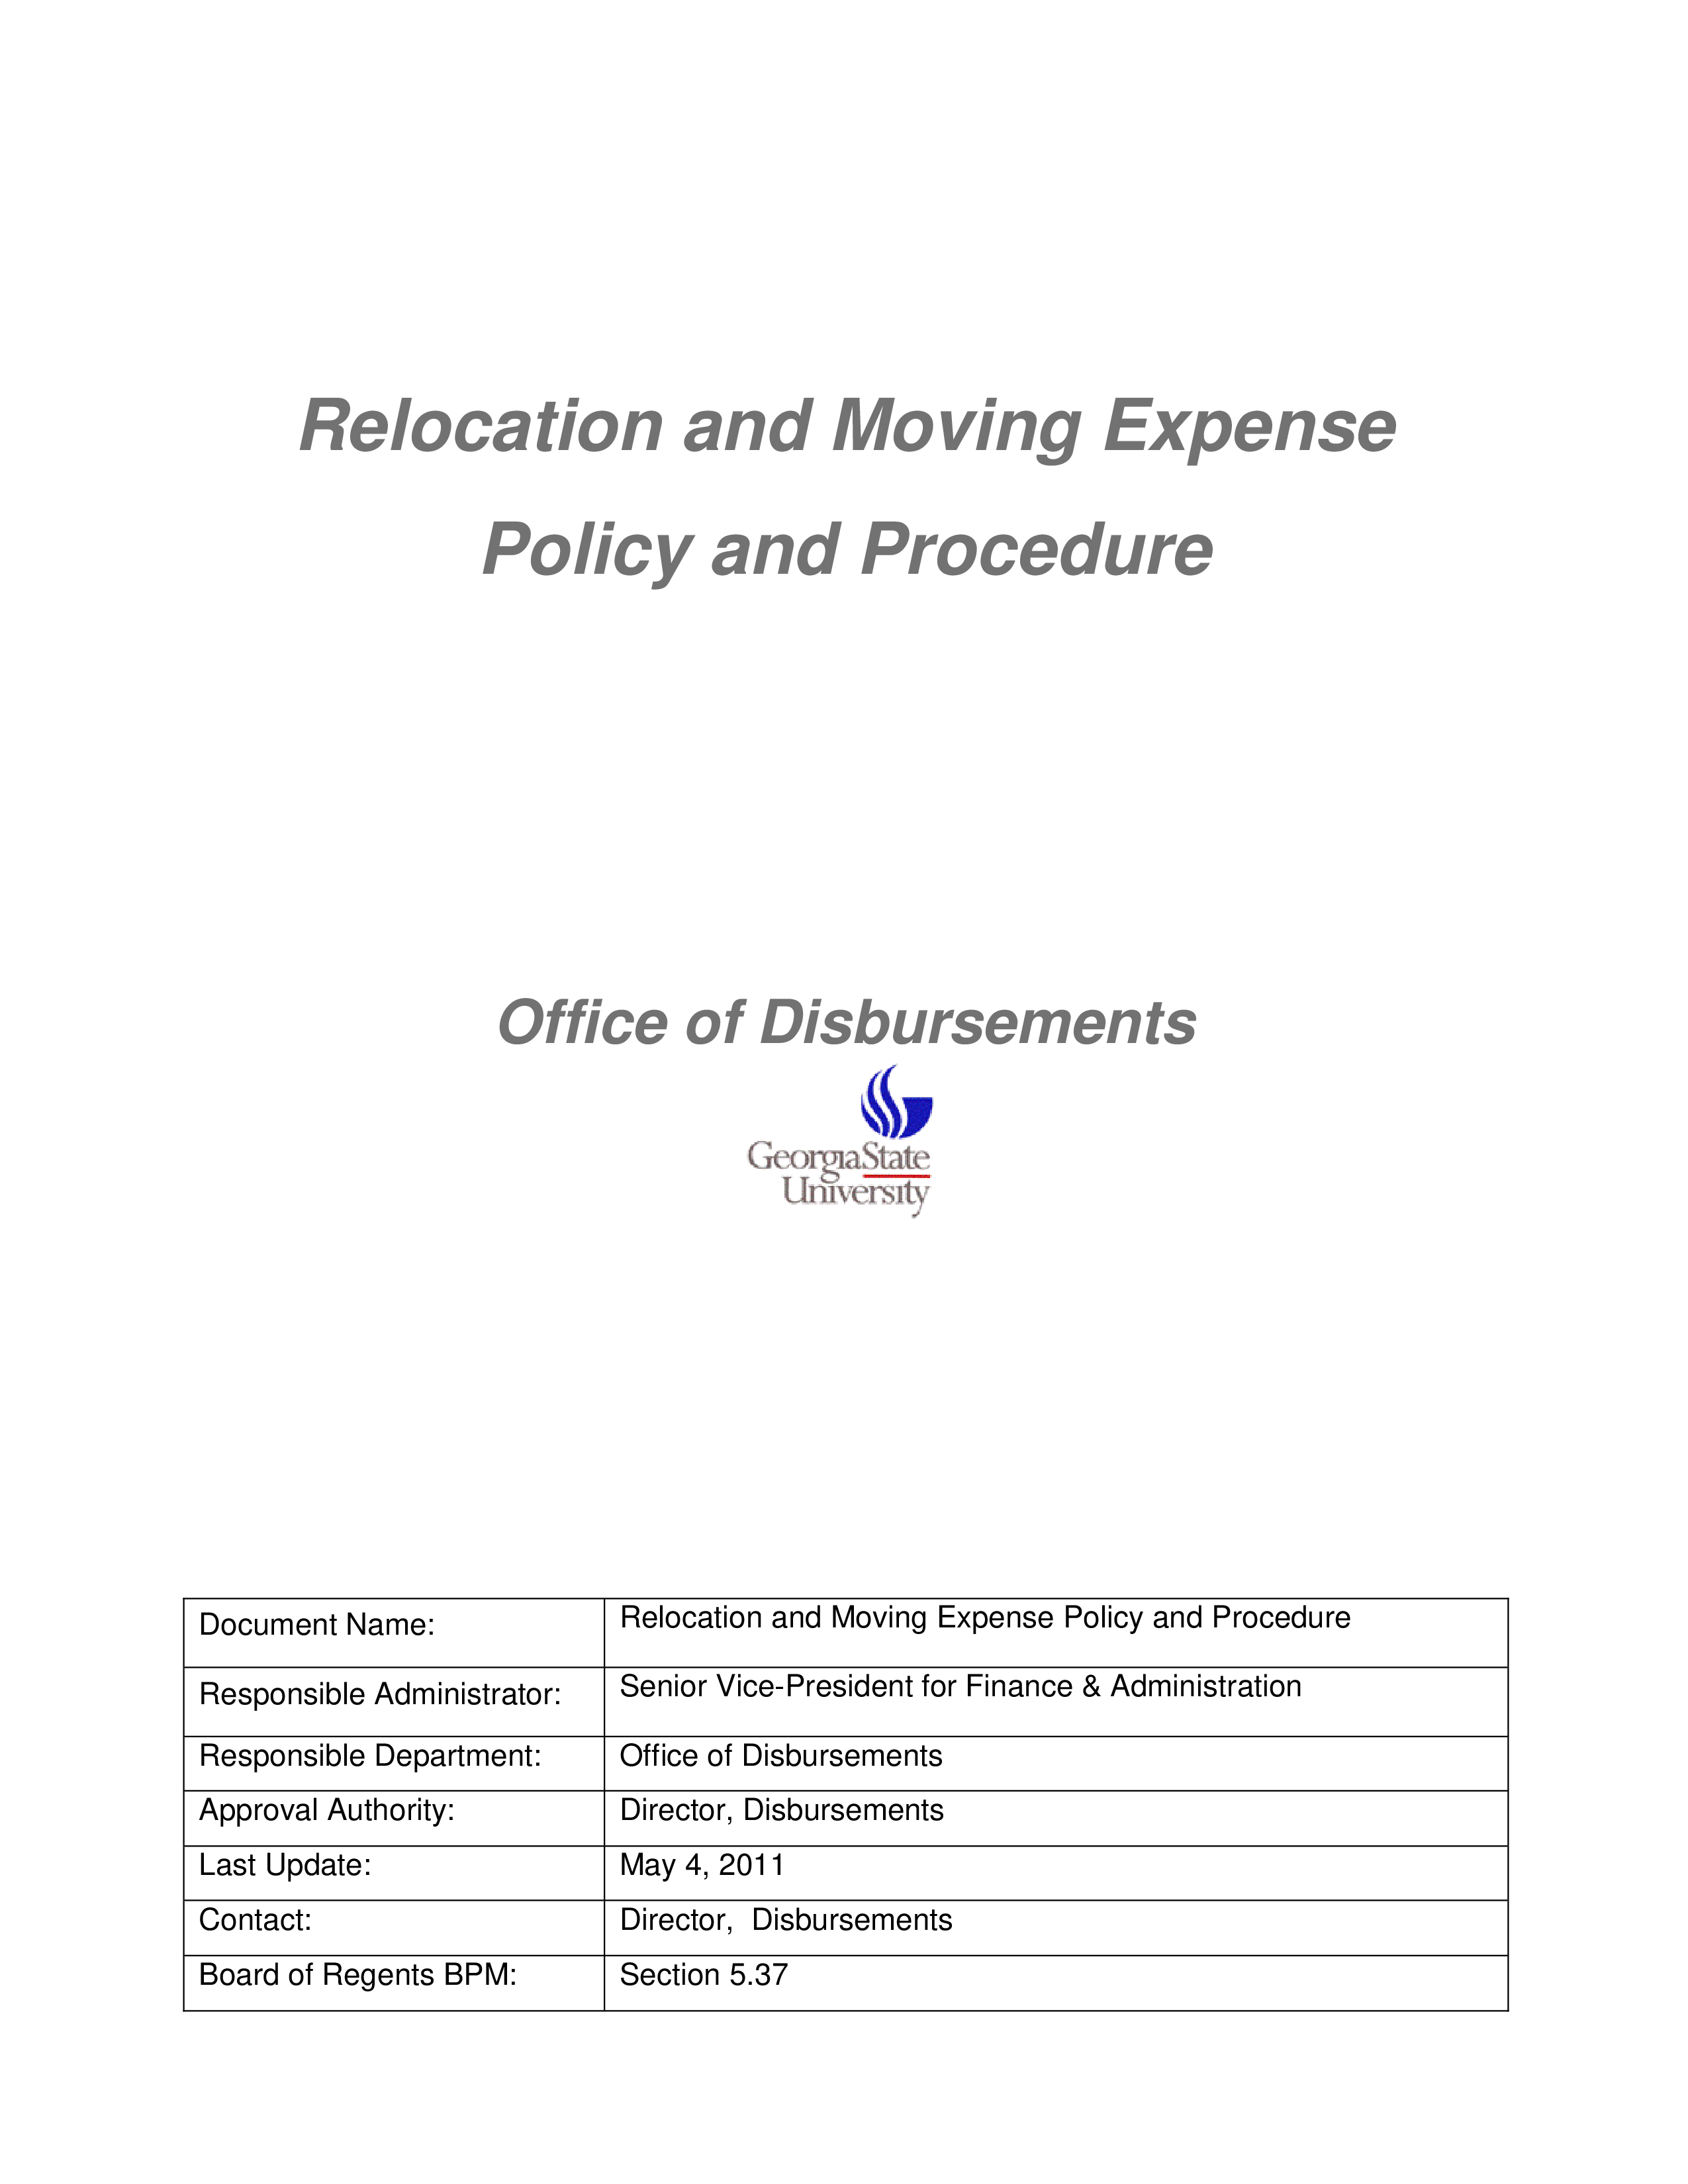 relocation and moving expense policy and procedure plantilla imagen principal